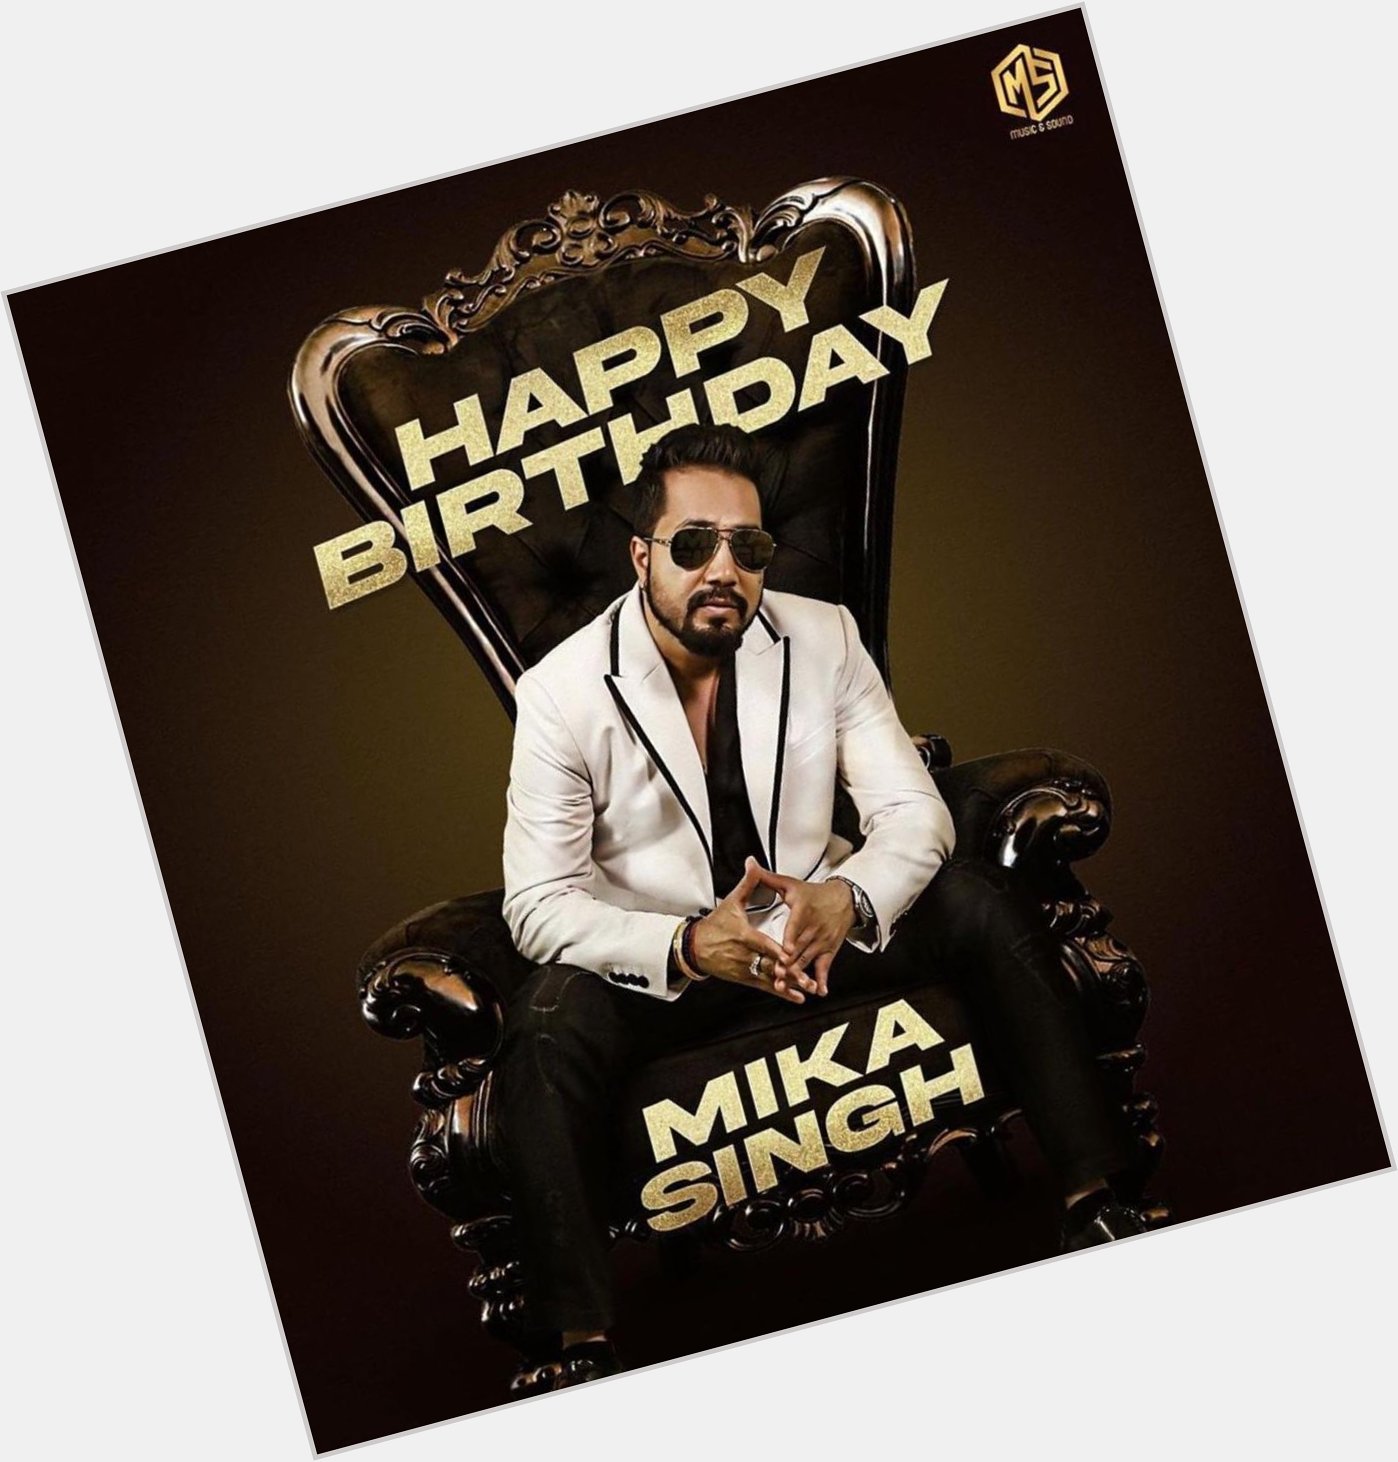  he is great singer as well.
Happy Birthday Mika Singh 